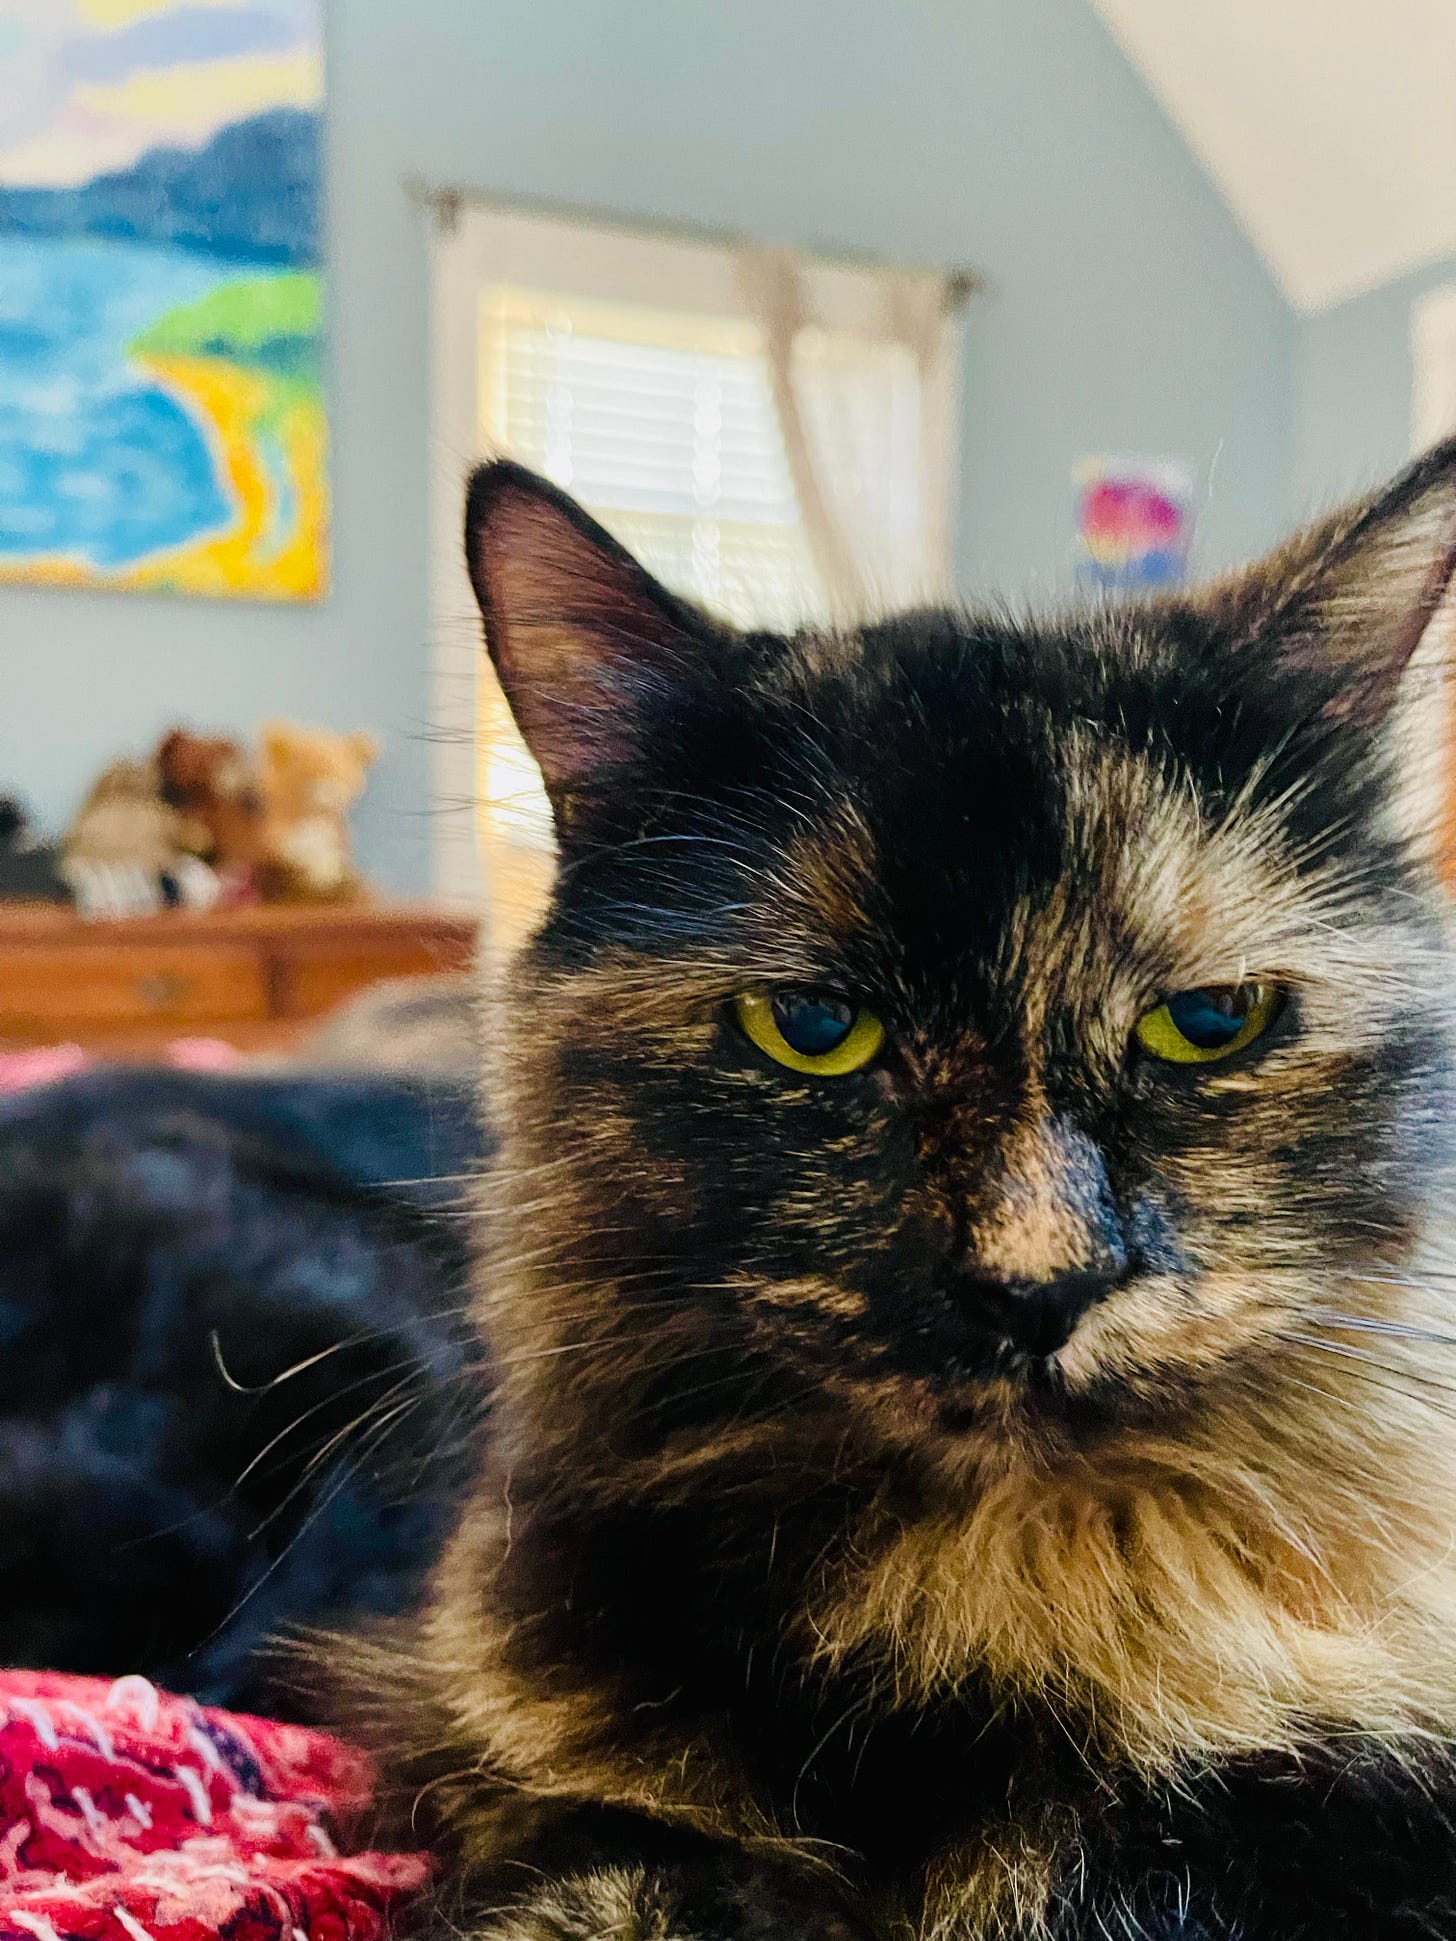 grumpy looking cat on bed with vague image of dog behind her